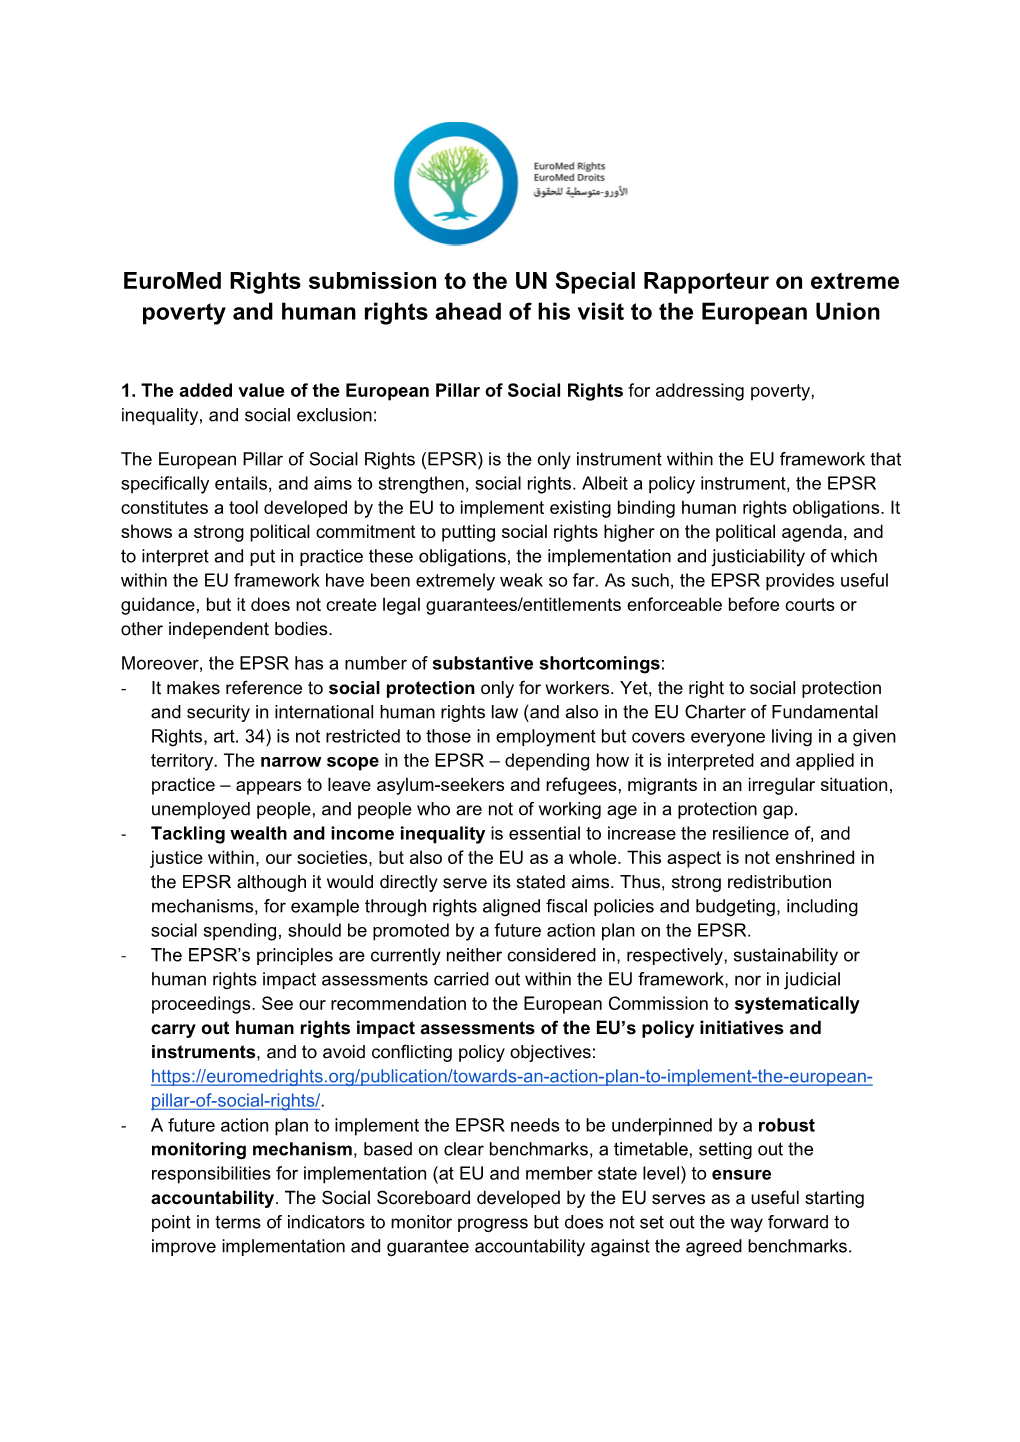 Euromed Rights Submission to the UN Special Rapporteur on Extreme Poverty and Human Rights Ahead of His Visit to the European Union